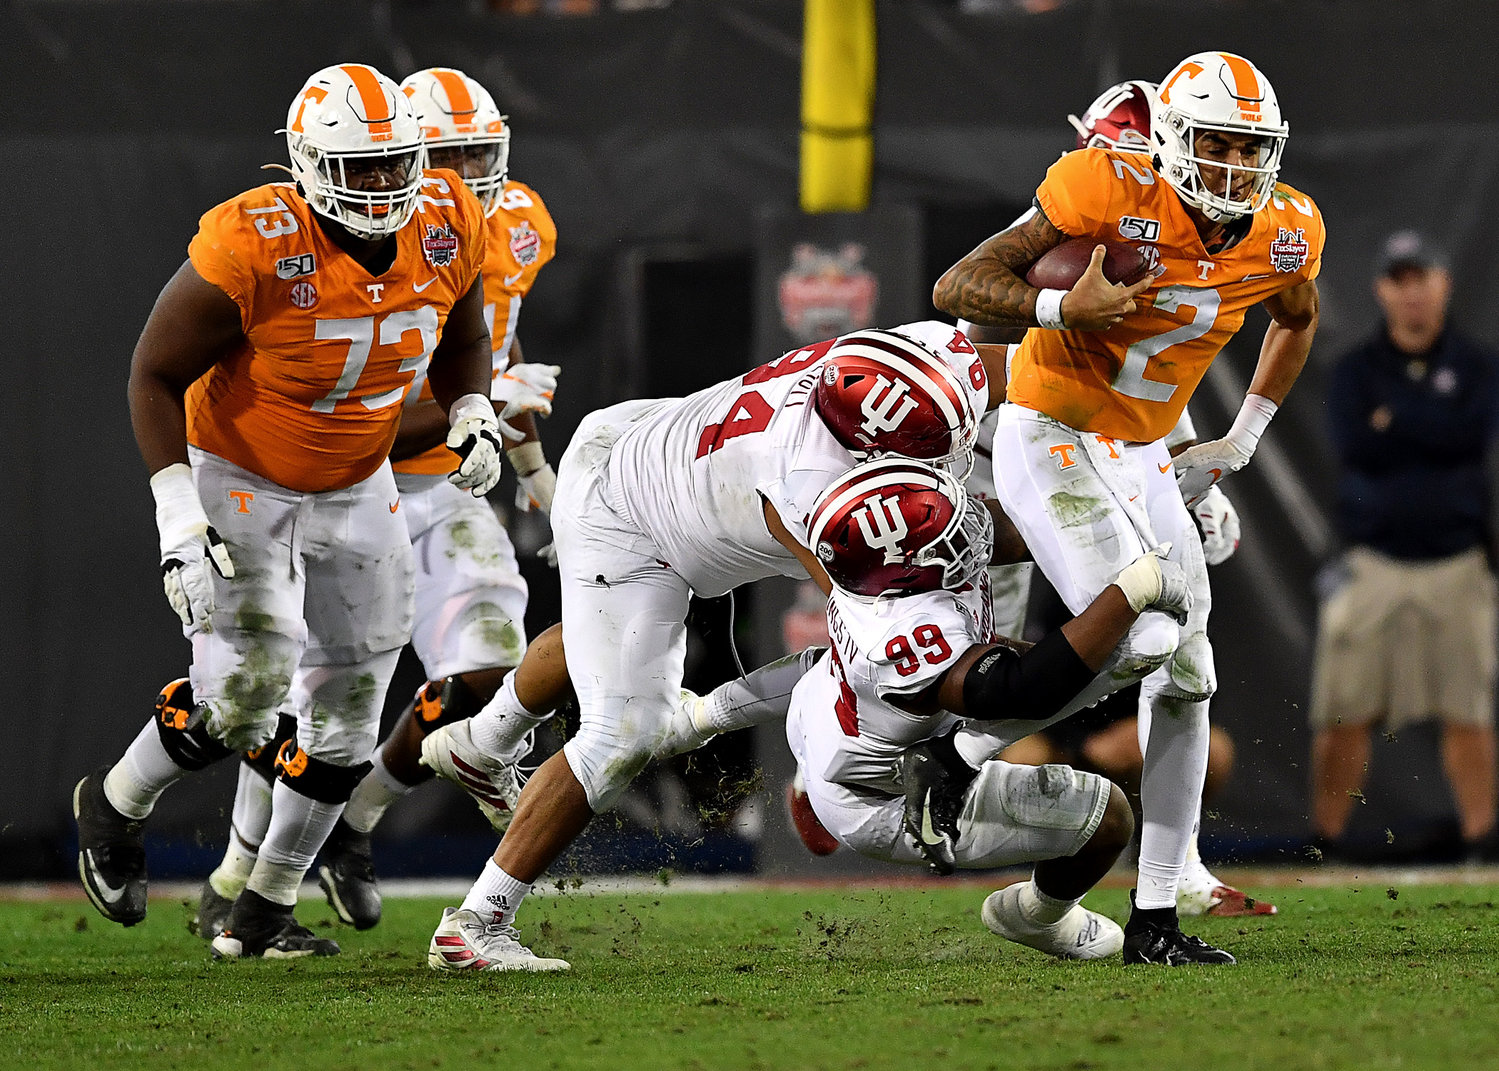 Tennessee Volunteers quarterback Jarrett Guarantano (2) on a keeper in the second half of the Gator Bowl NCAA football game against the Indiana Hoosiers Thursday, January 2, 2020, at TIAA Bank Field in Jacksonville, Fla.